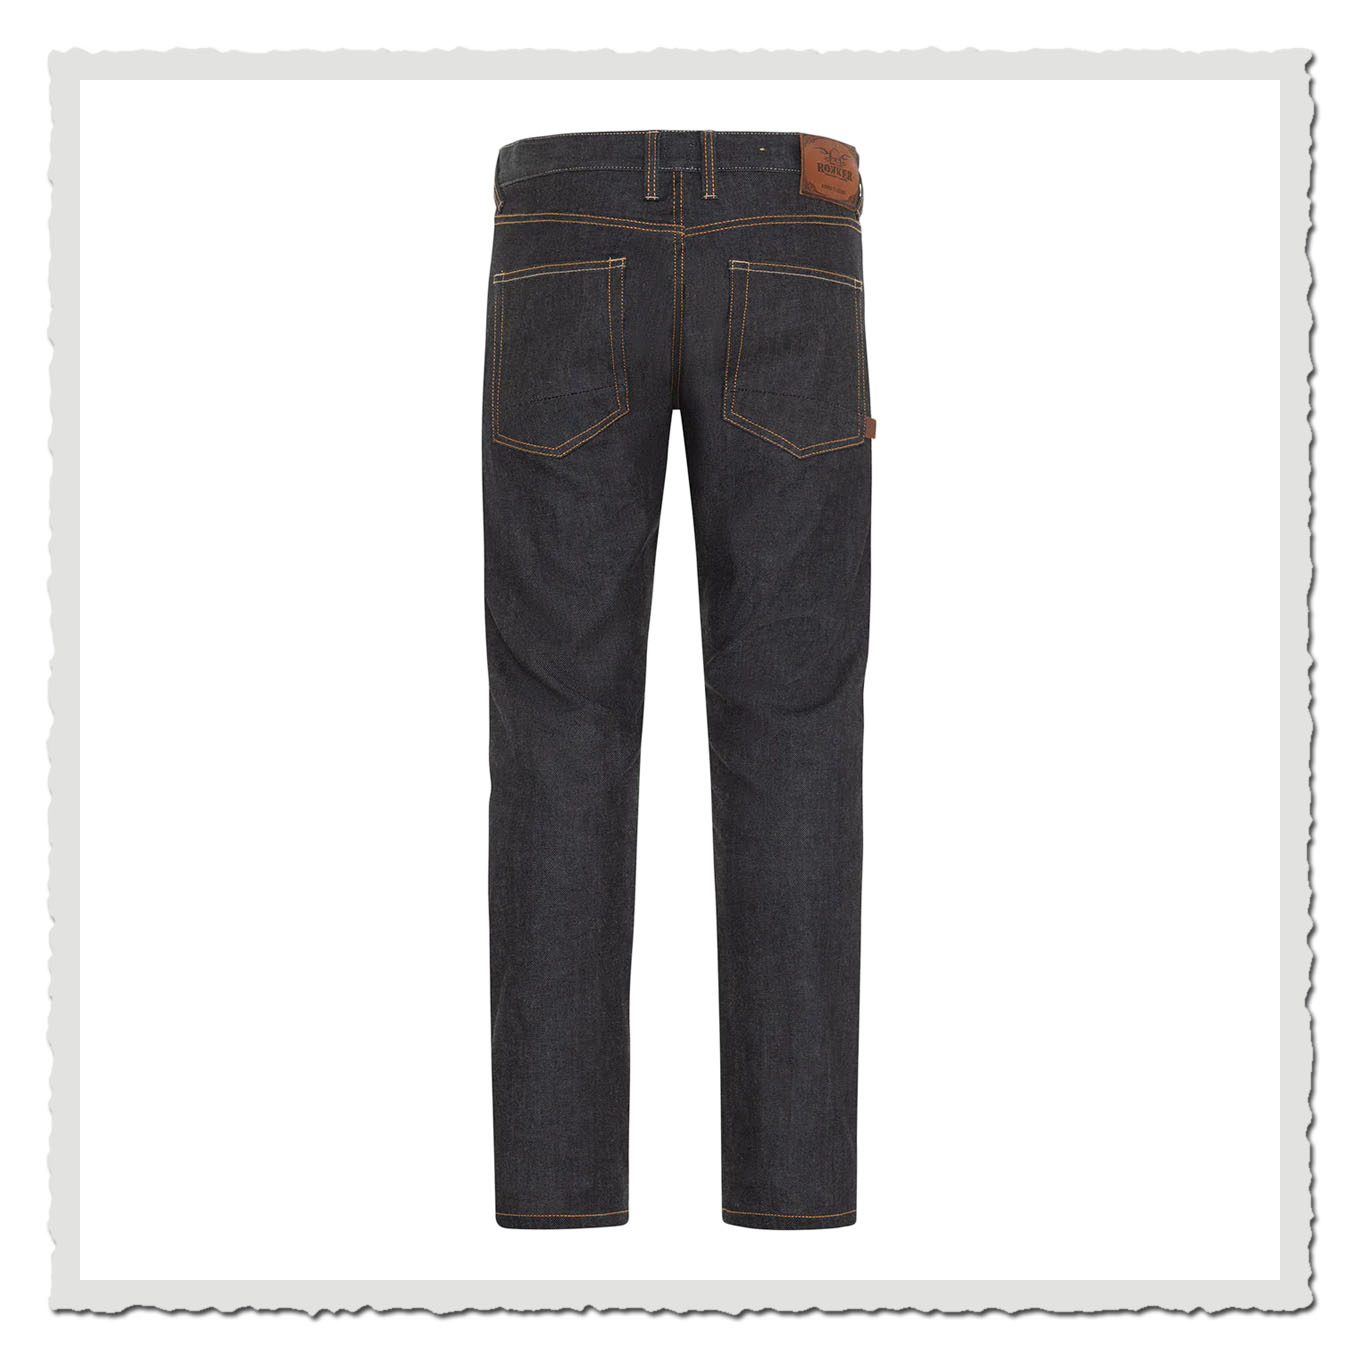 Rokker Iron Selvage Raw